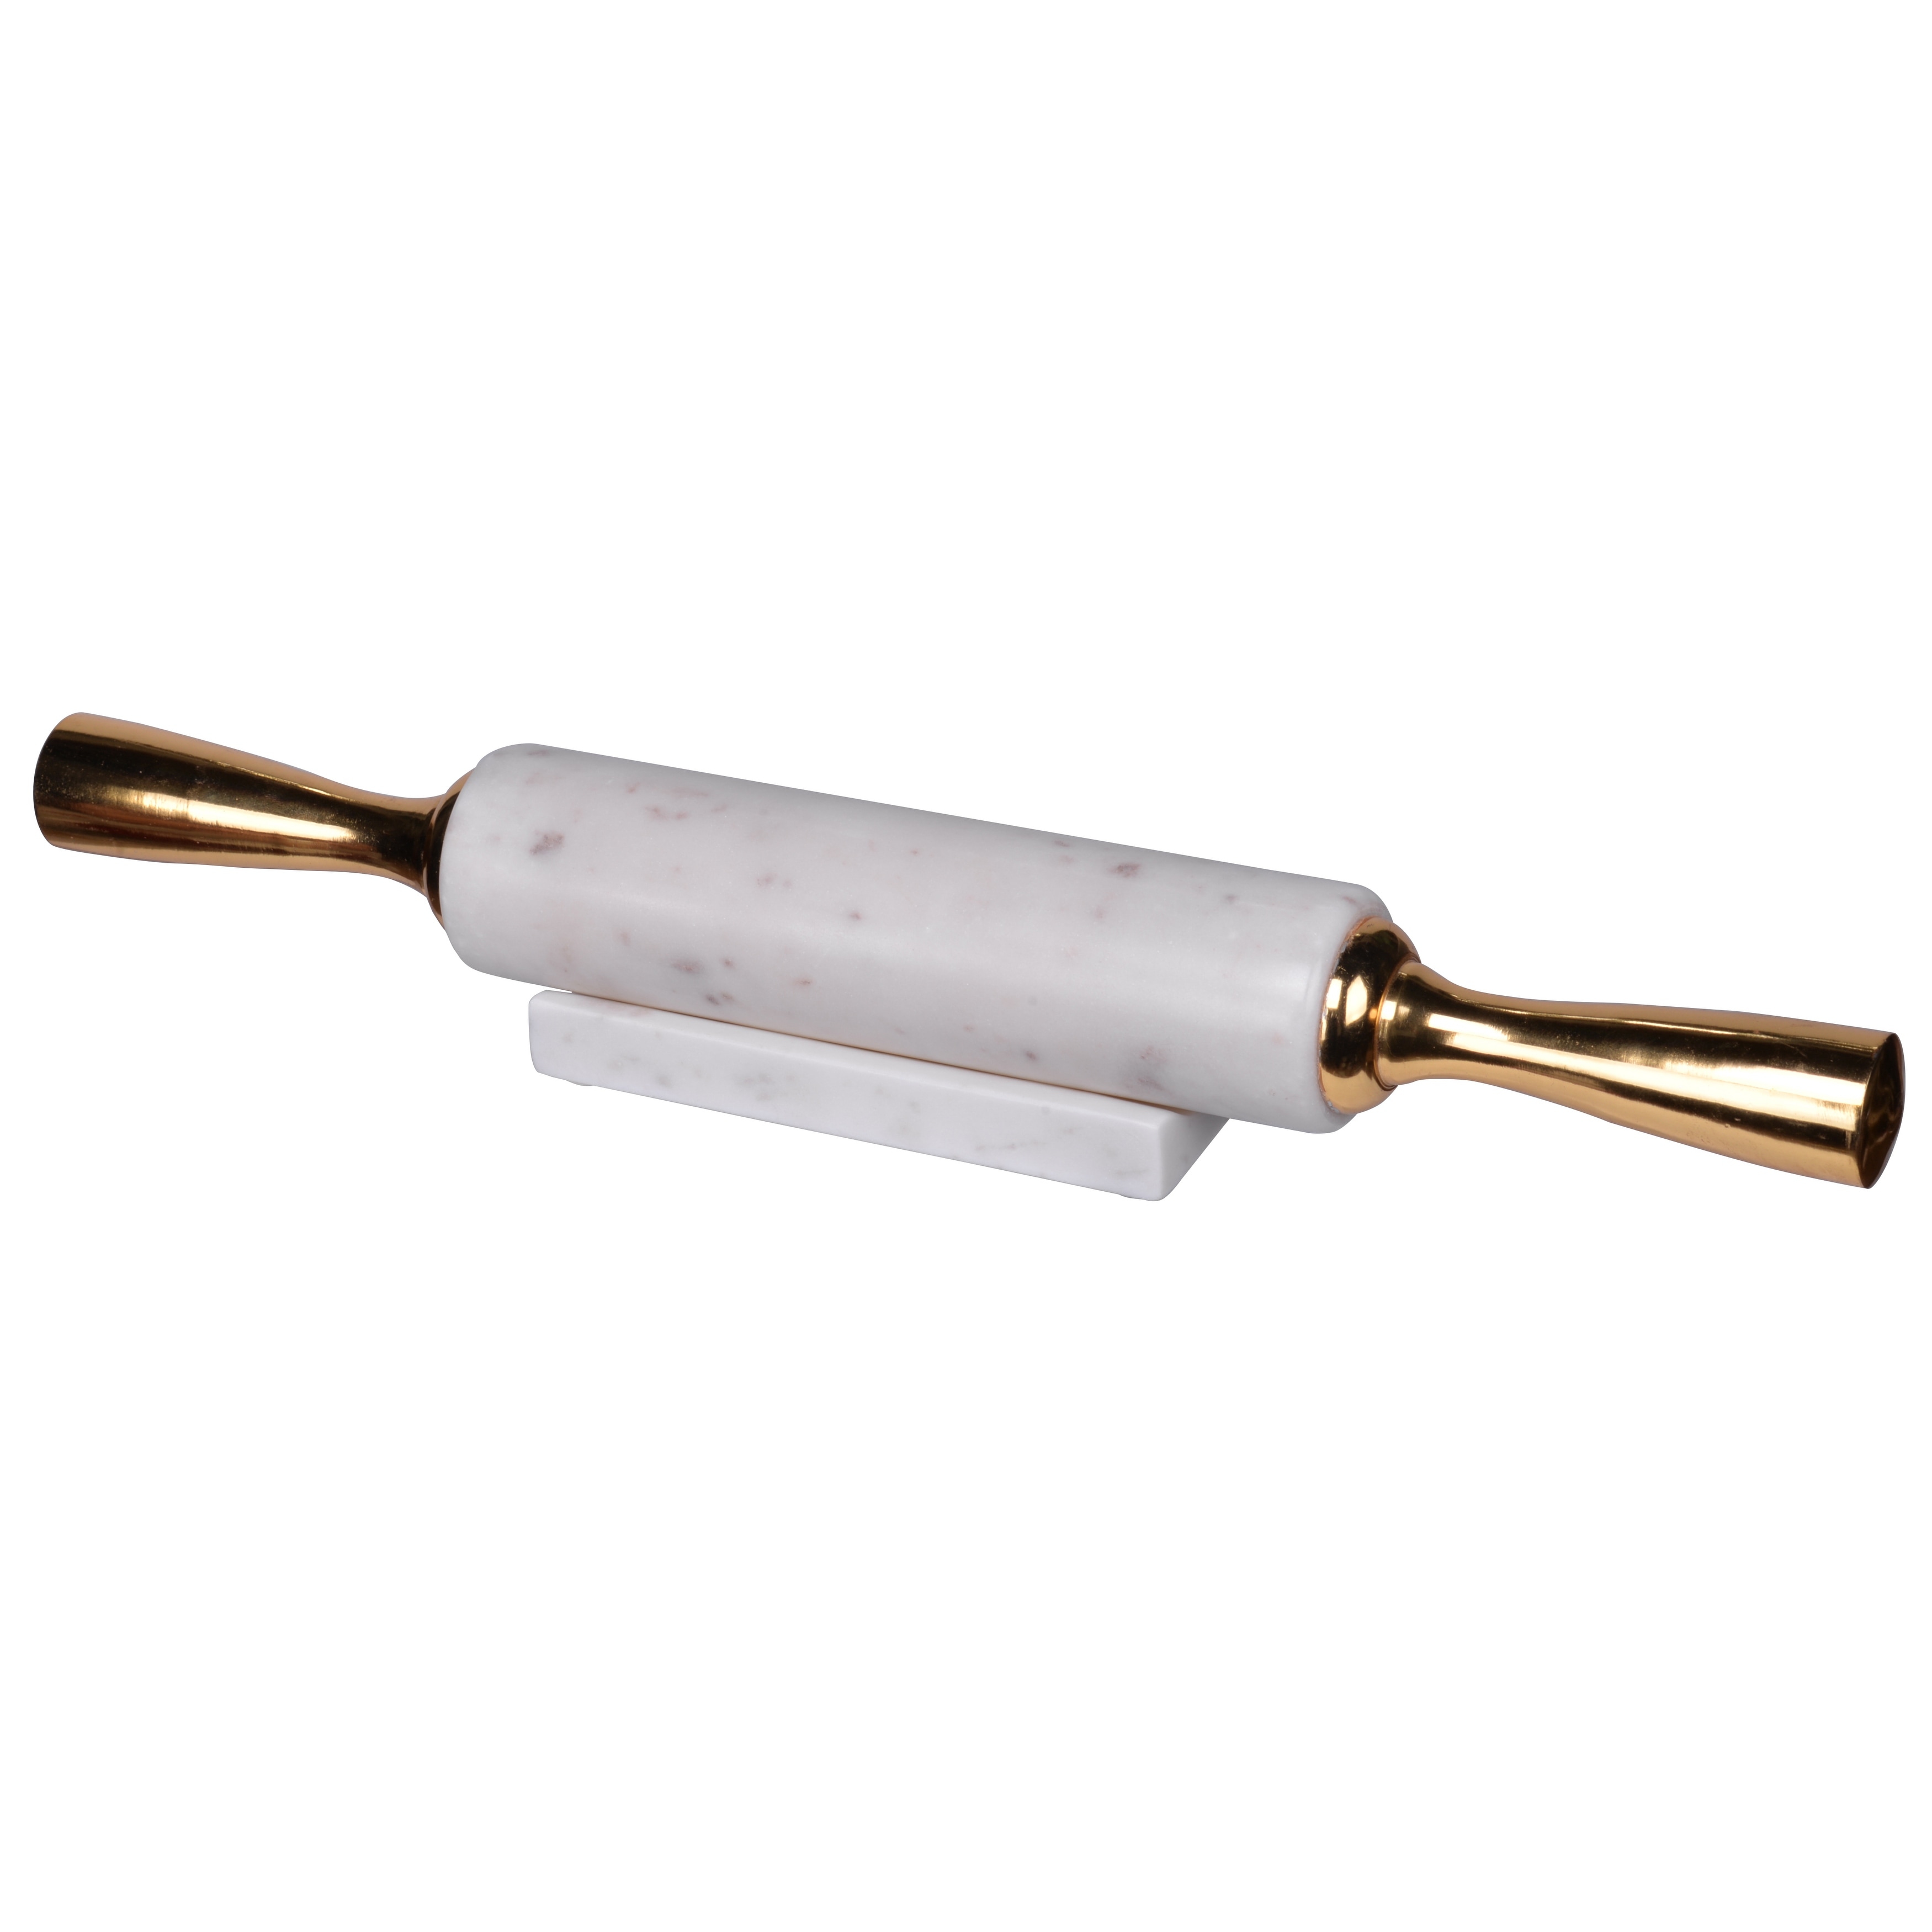 https://ak1.ostkcdn.com/images/products/is/images/direct/3e2df6387dc0603c4df2b4519650796d4edce8a4/Banswara-White-and-Gold-Marble-Rolling-Pin-with-Handles.jpg